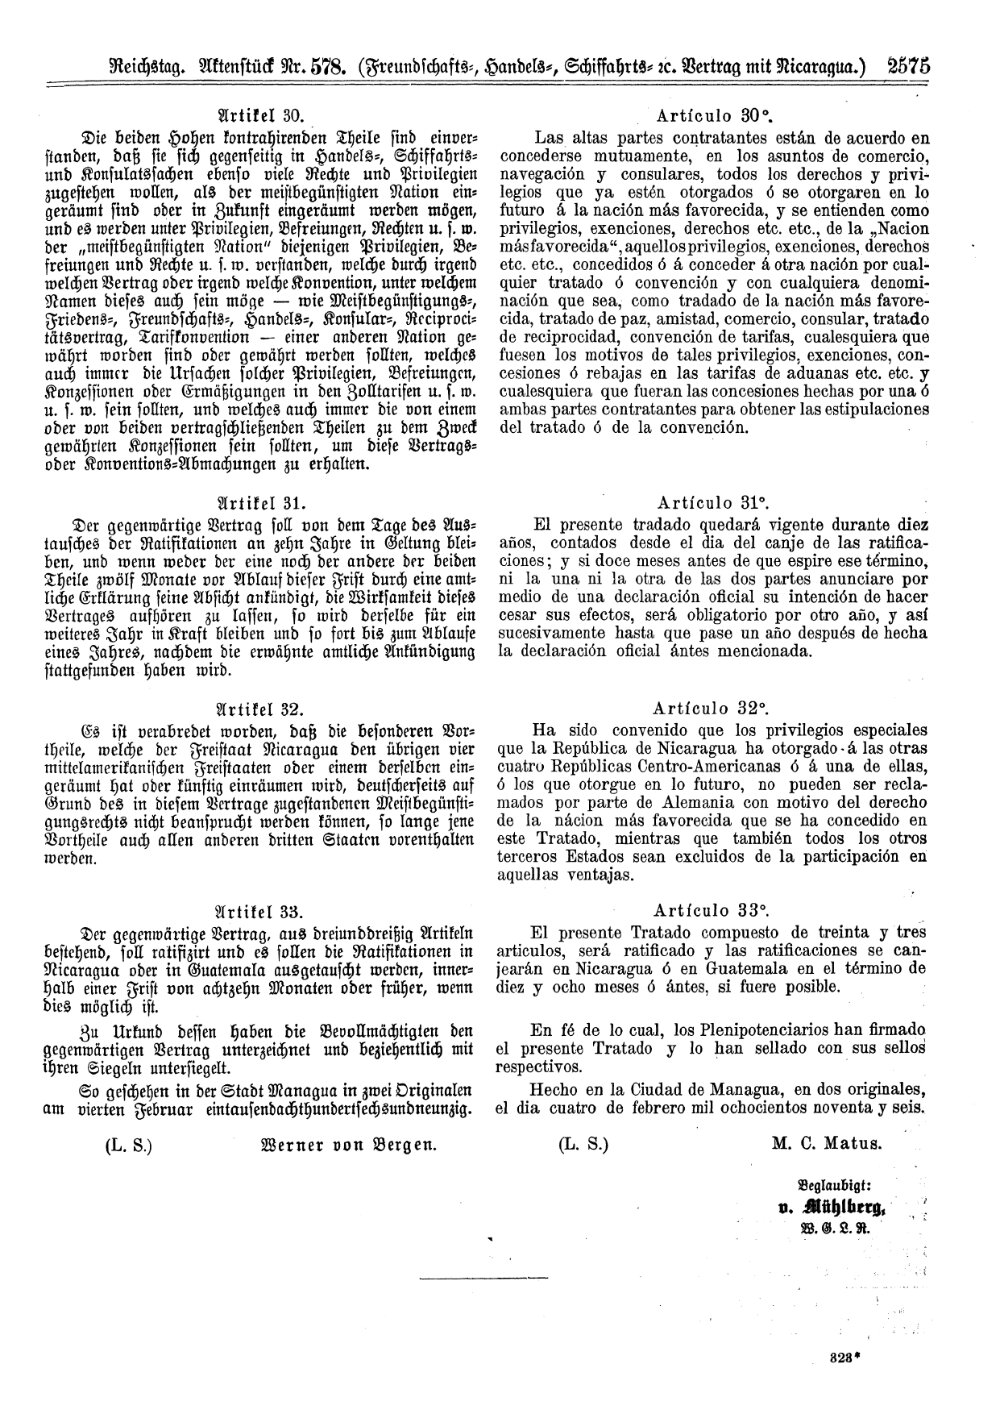 Scan of page 2575